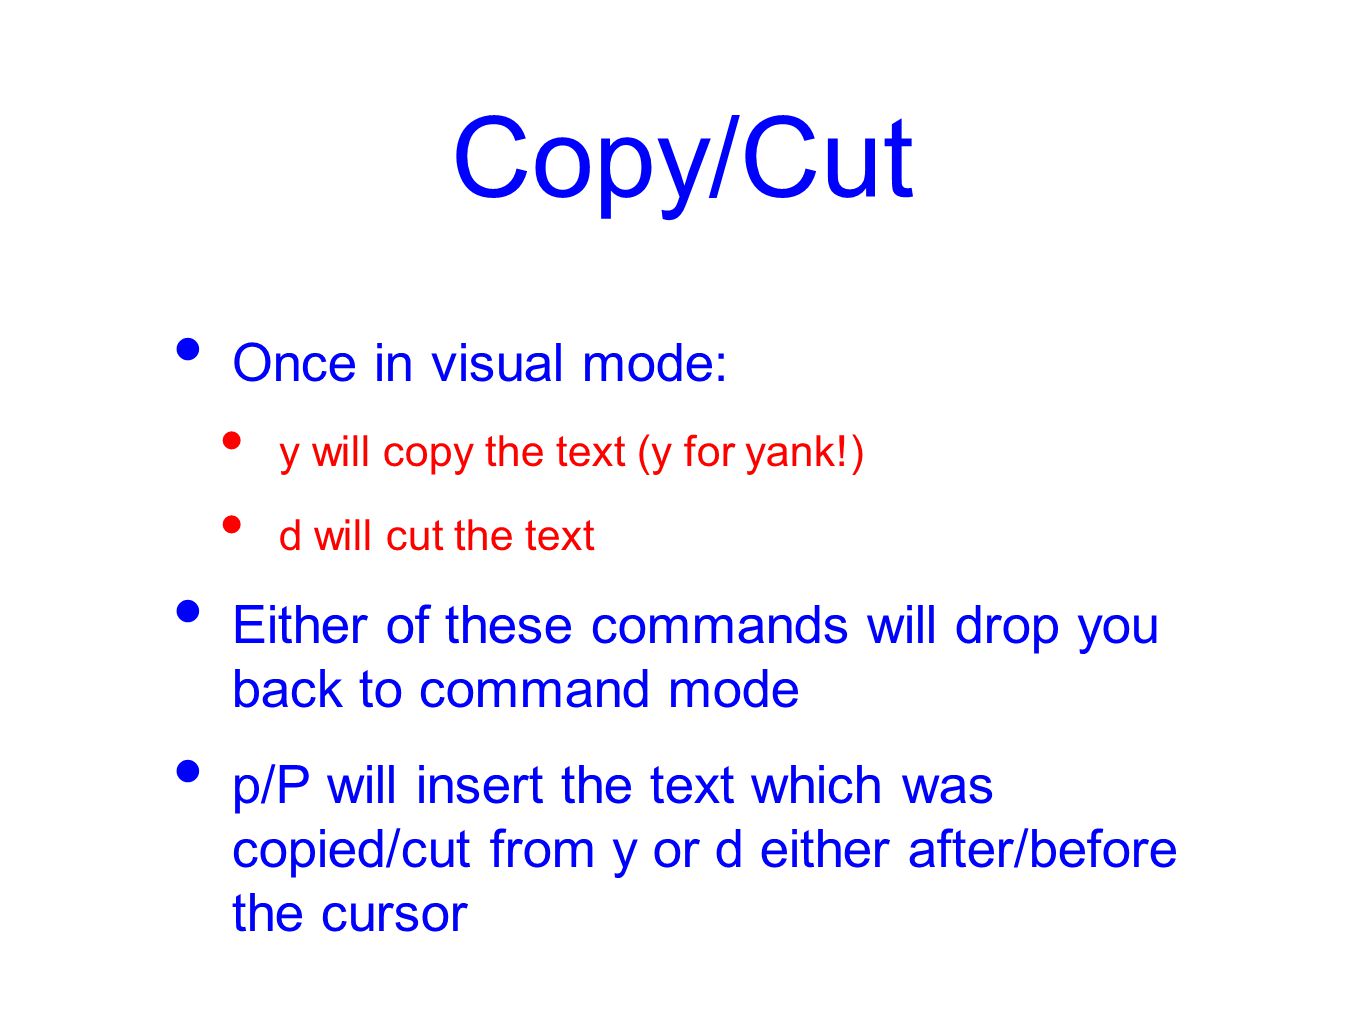 Copy/Cut Once in visual mode: y will copy the text (y for yank!) d will cut the text Either of these commands will drop you back to command mode p/P will insert the text which was copied/cut from y or d either after/before the cursor